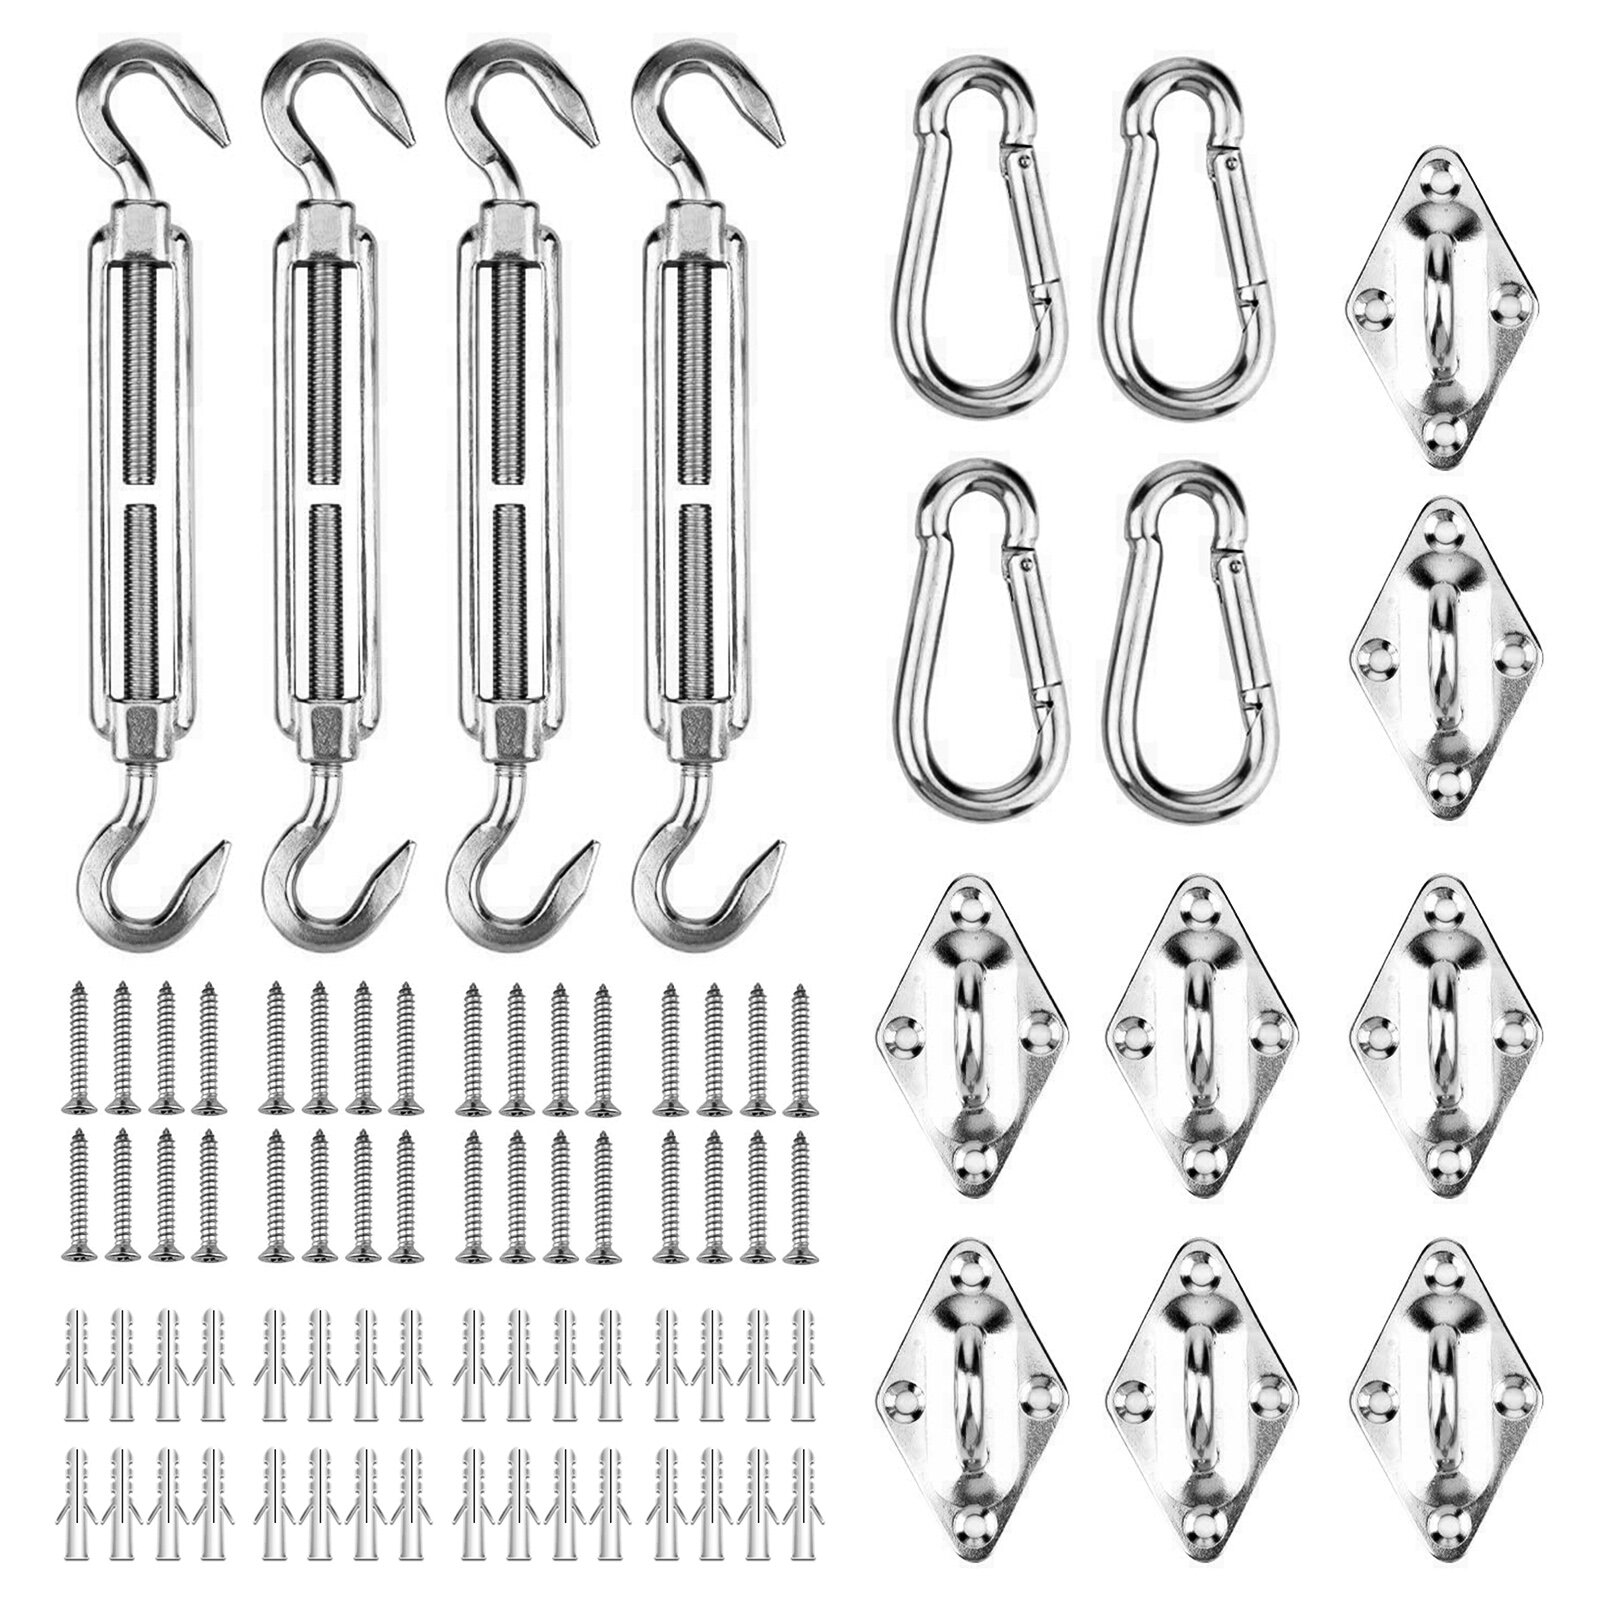 NASUM 80PCS Shade Sail Hardware Parasols Tents Hooks Climbing Buckles Screws Stainless Steel Tent Accessories for Outdoor Garden Courtyard